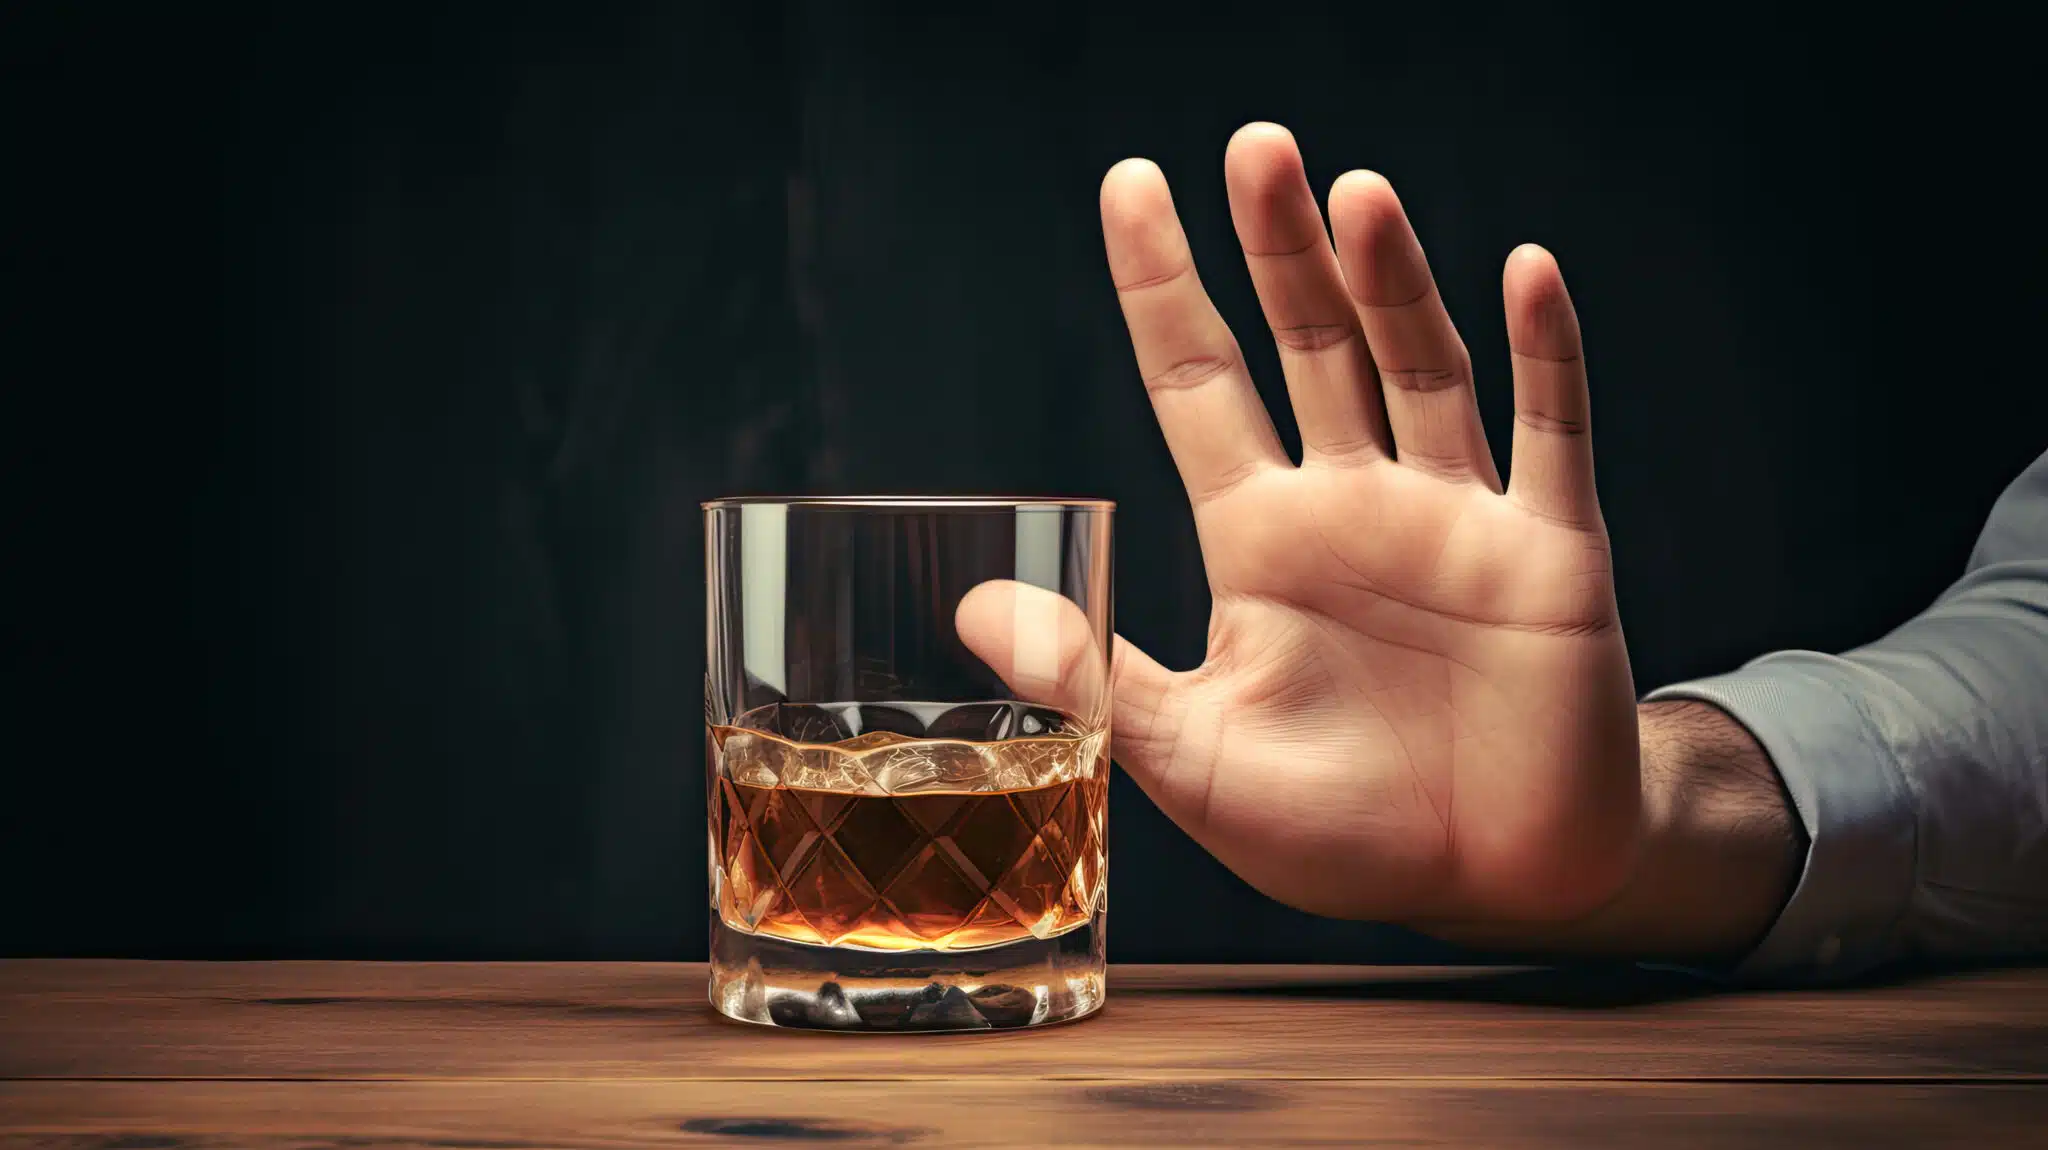 A hand held up rejecting a glass of alcohol - Defining Sobriety What Does It Mean To Be Sober